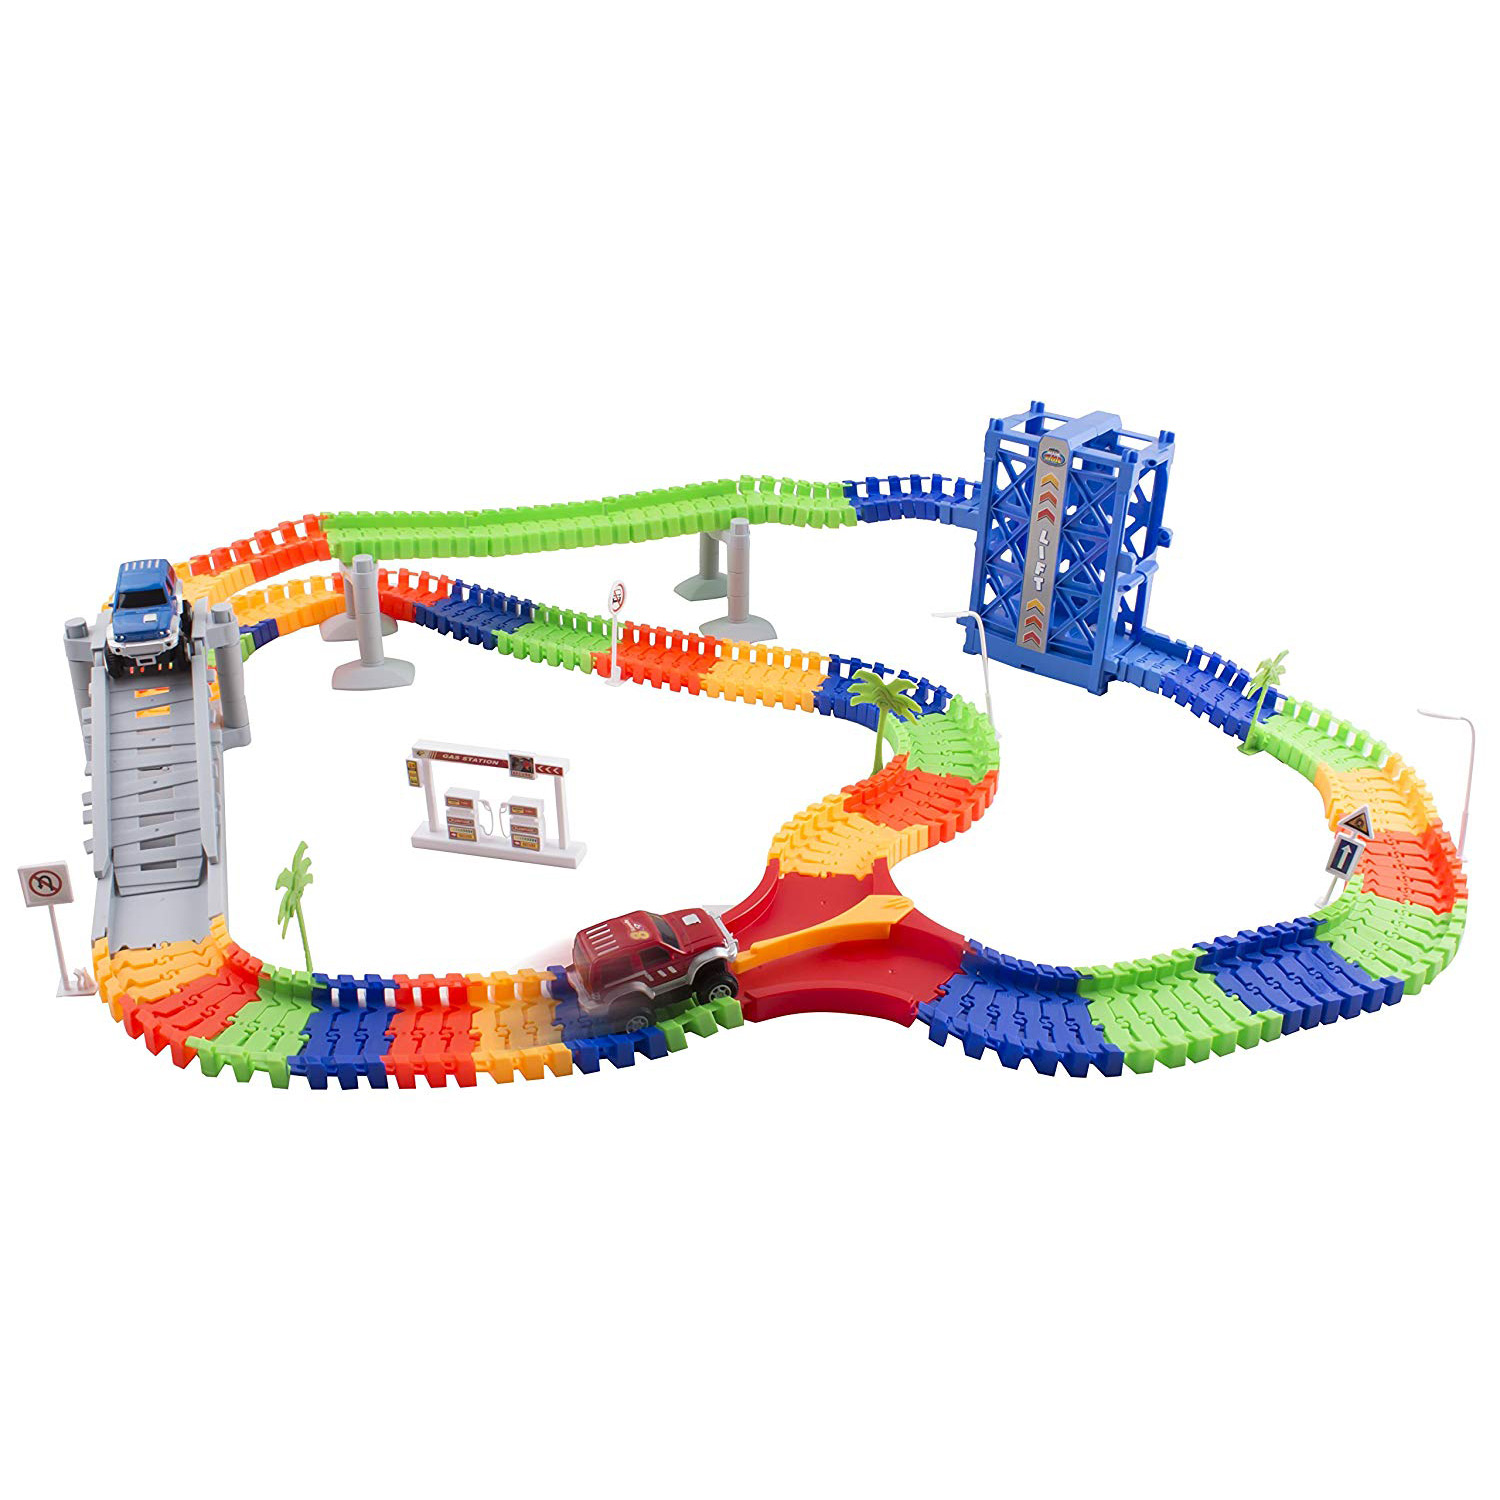 Race Car Track Set 240 Pieces Twisted Flexible Building Toy Tracks 2 Cars 1109 